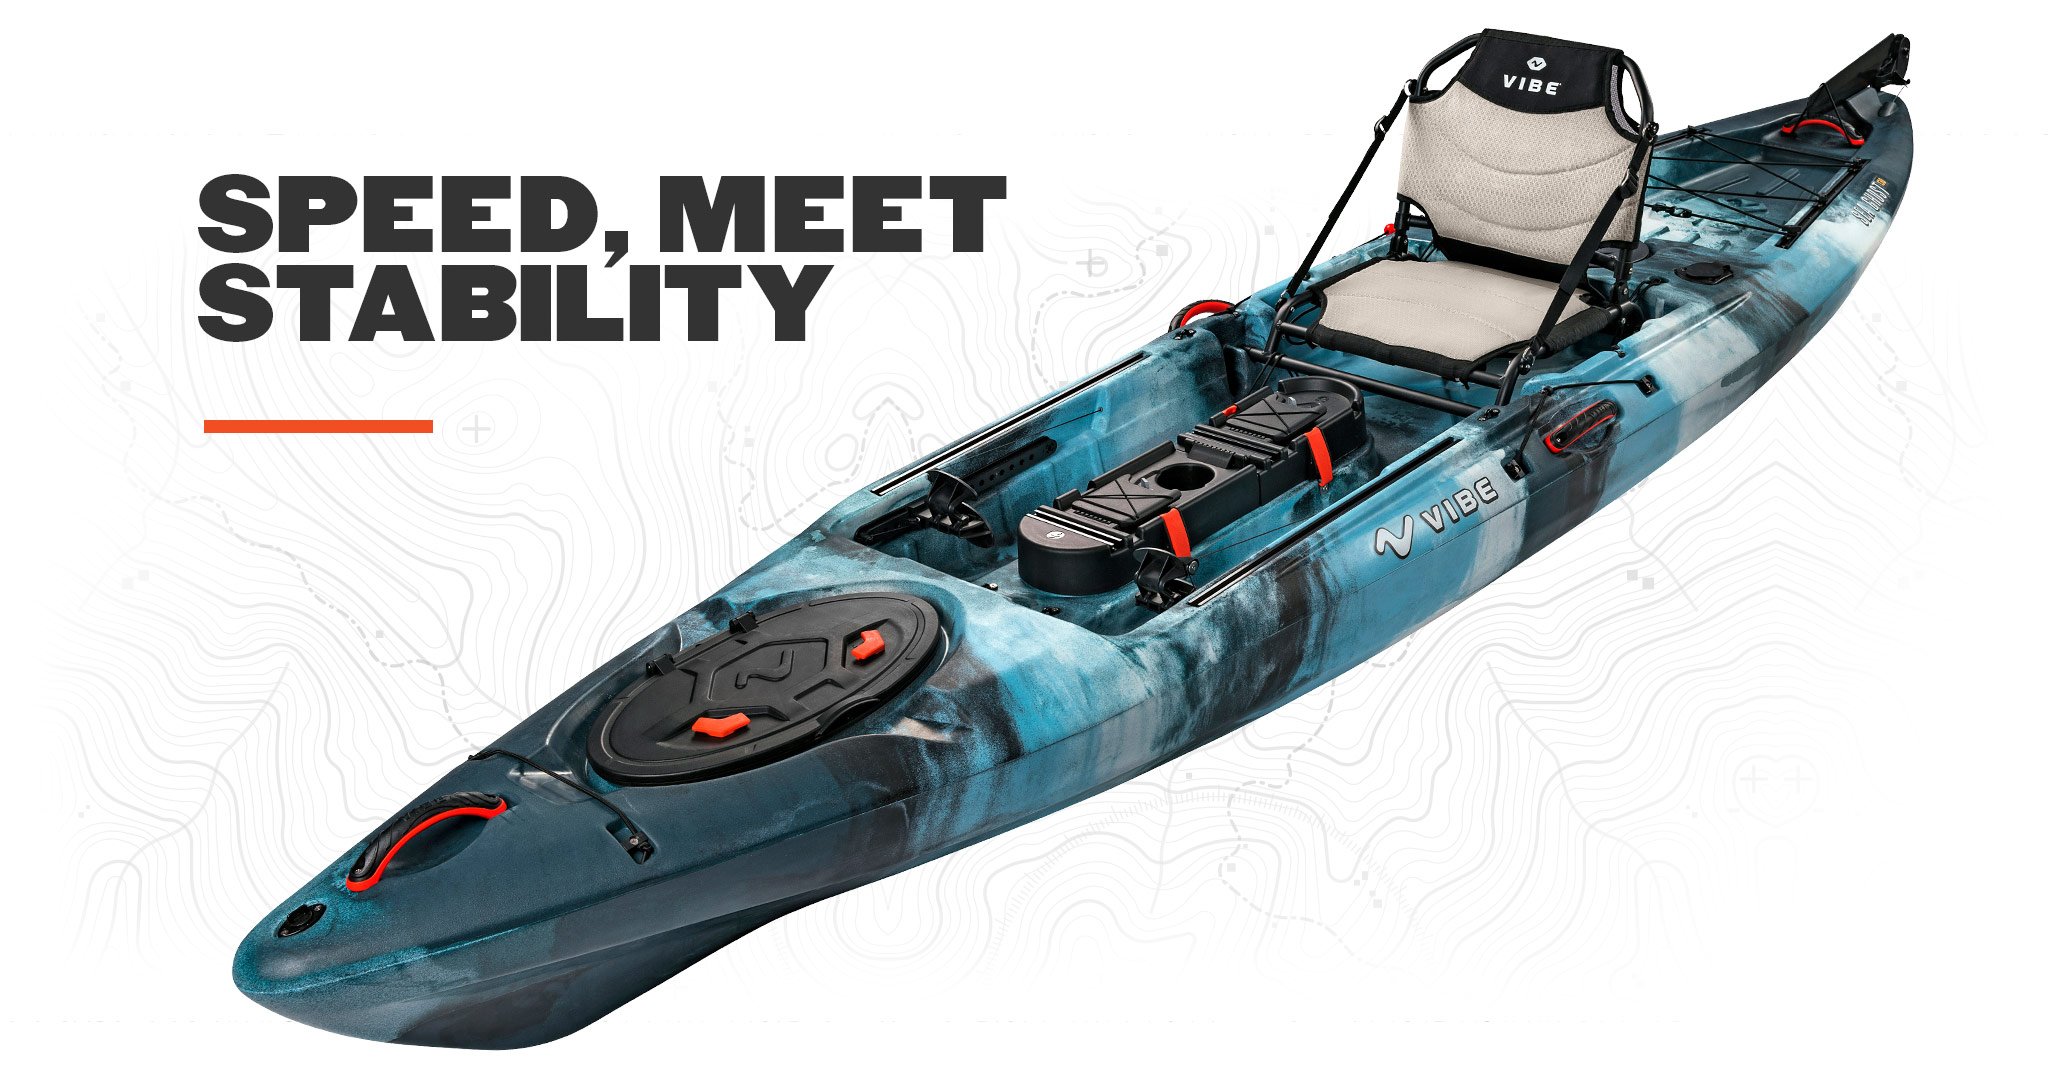 2019 Vibe Sea Ghost 130 Speed Meet Stability